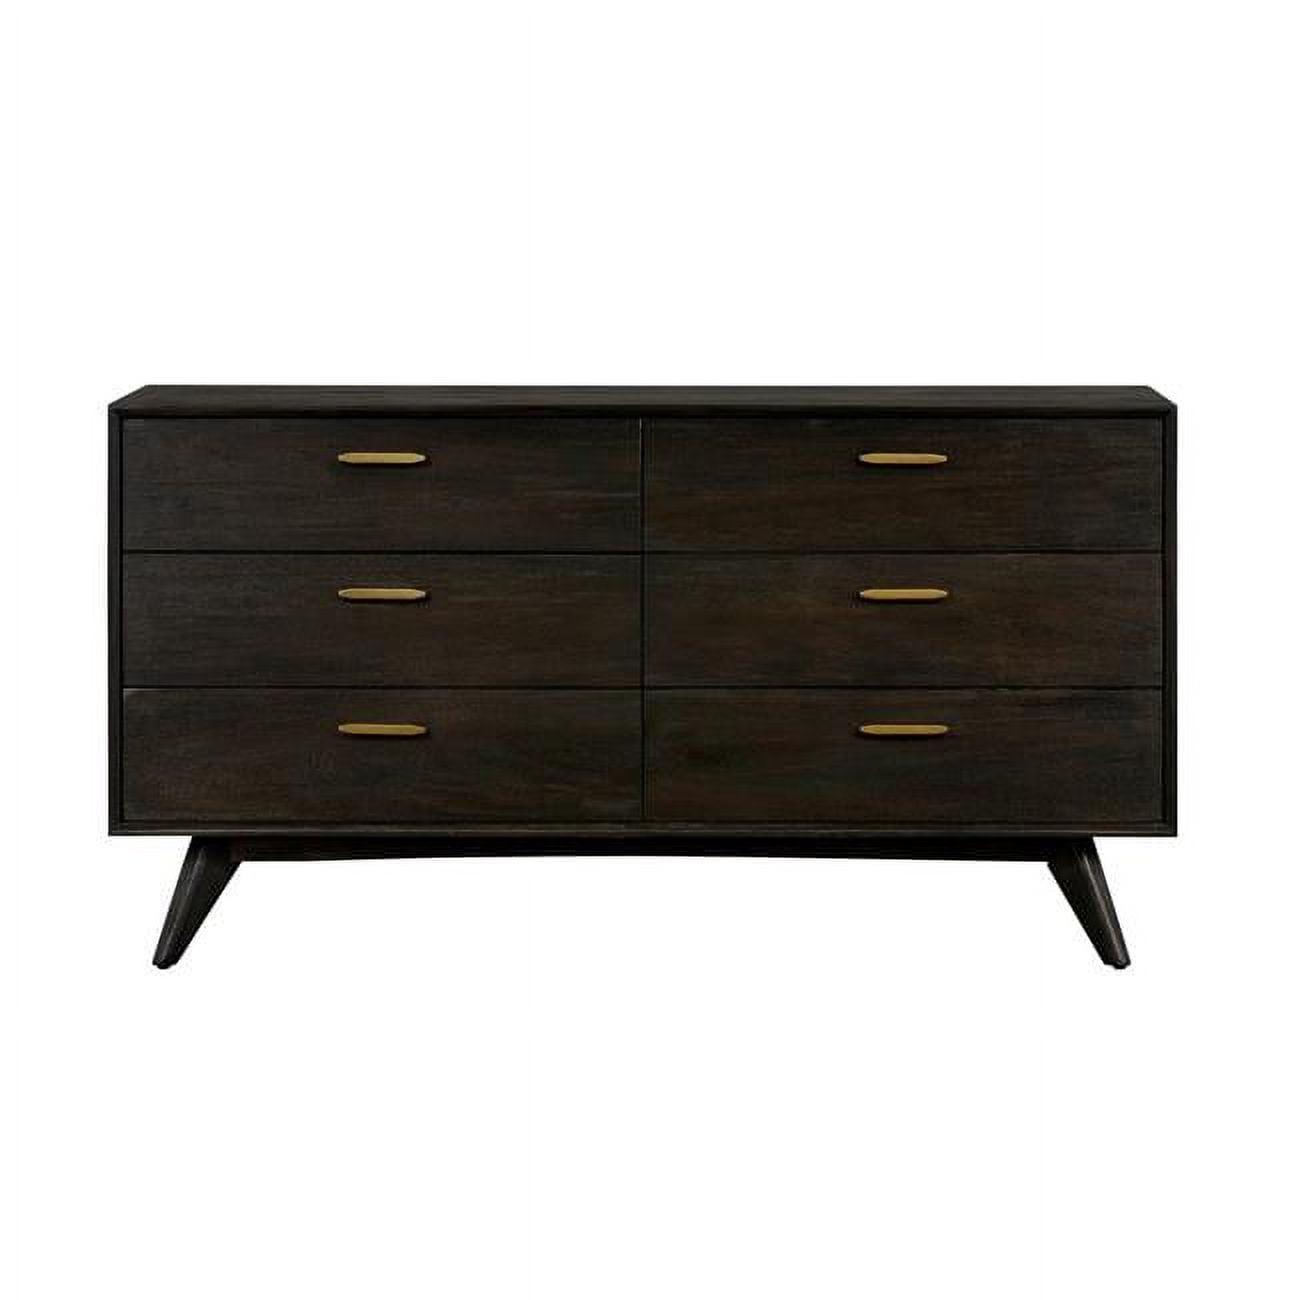 Baly Mid-Century Modern Double Dresser with Velvet Lined Drawers, Brown